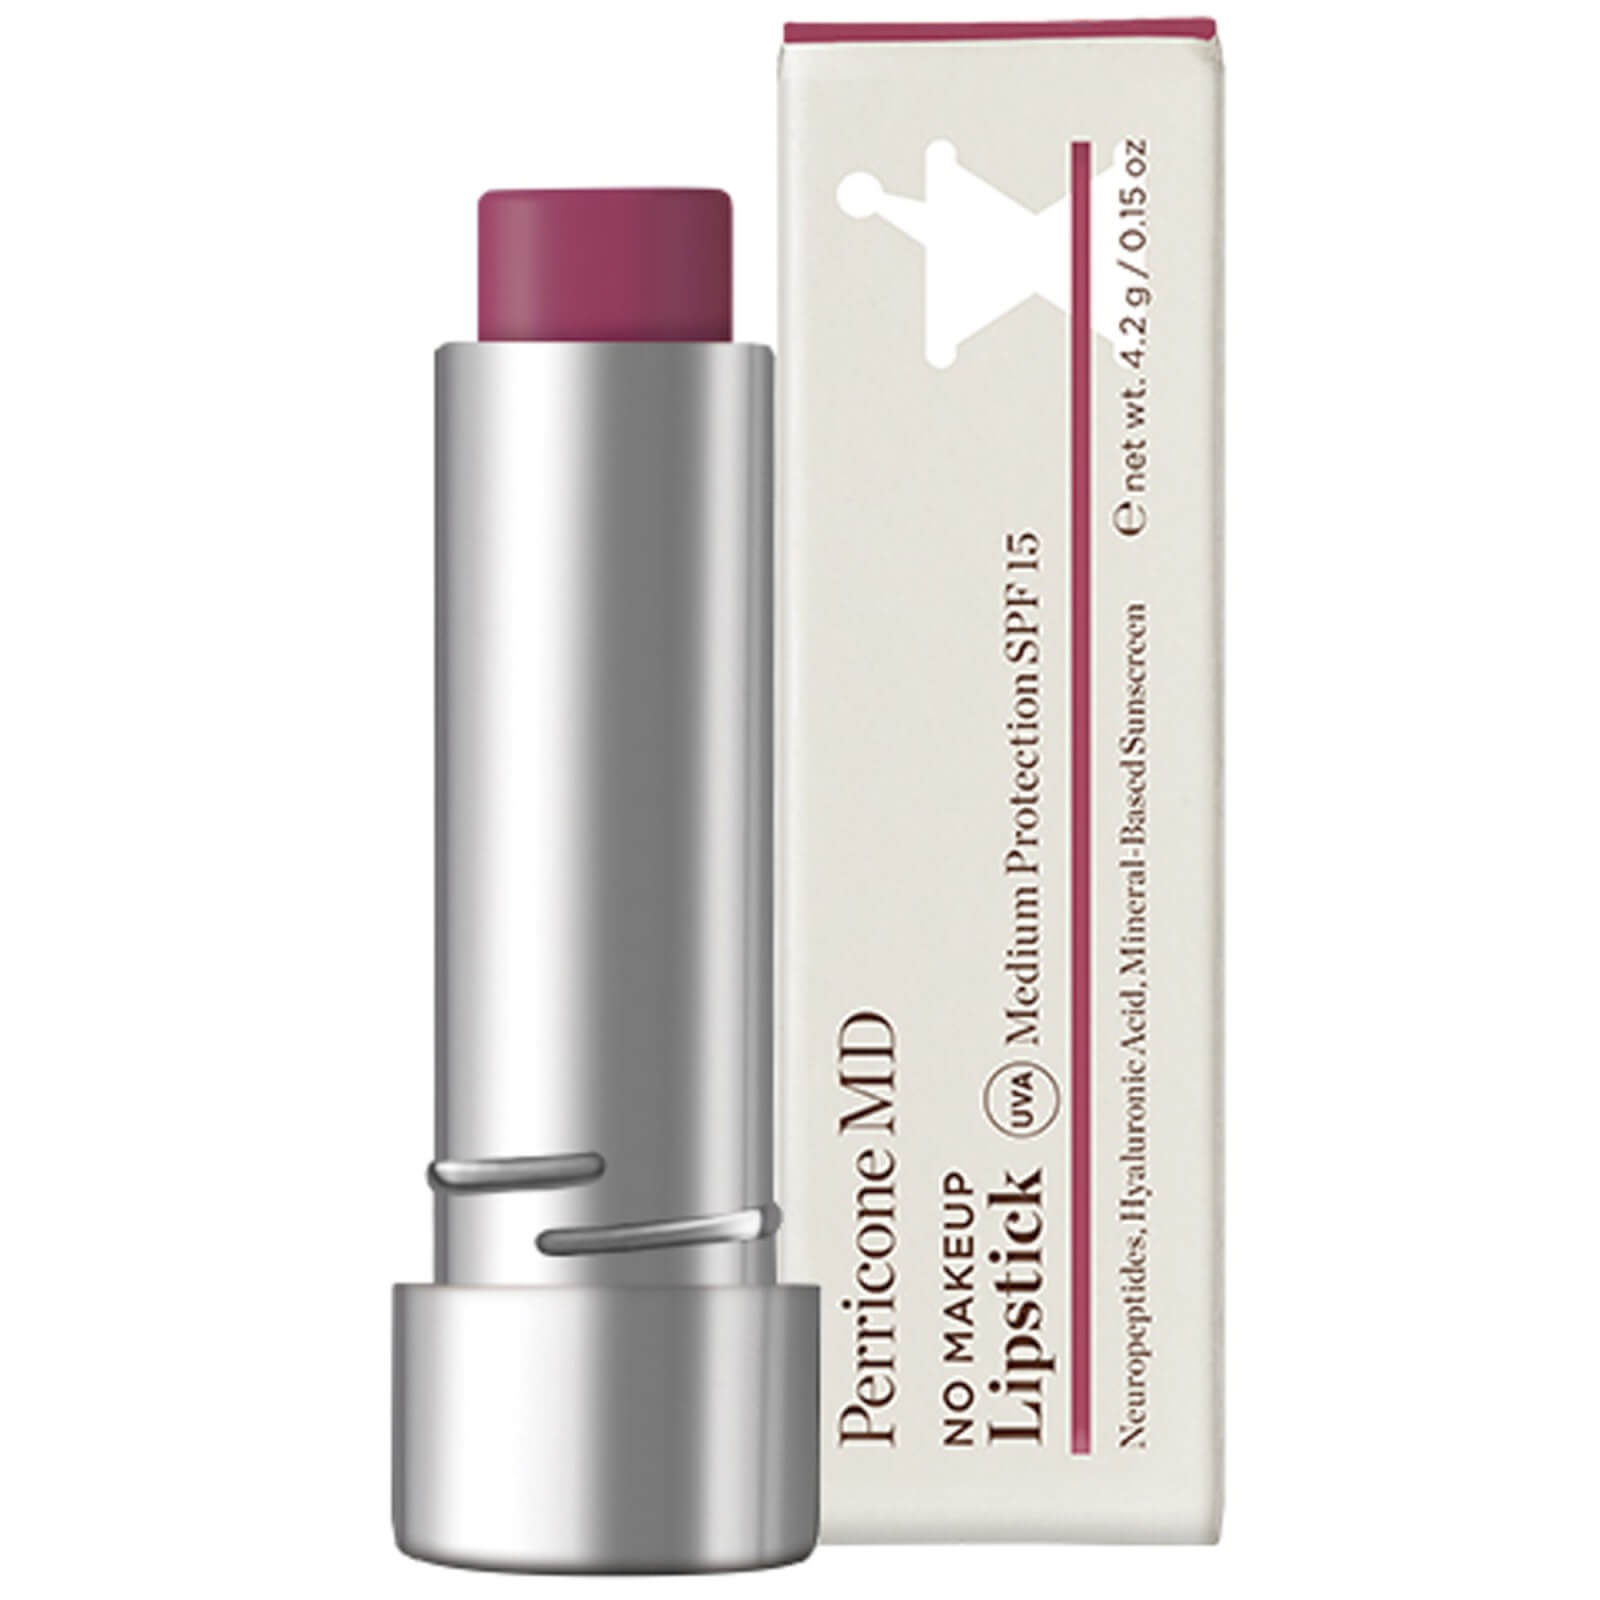 Image of Perricone MD No Makeup Lipstick SPF 15 4.2g (Various Shades) - 2 Rose